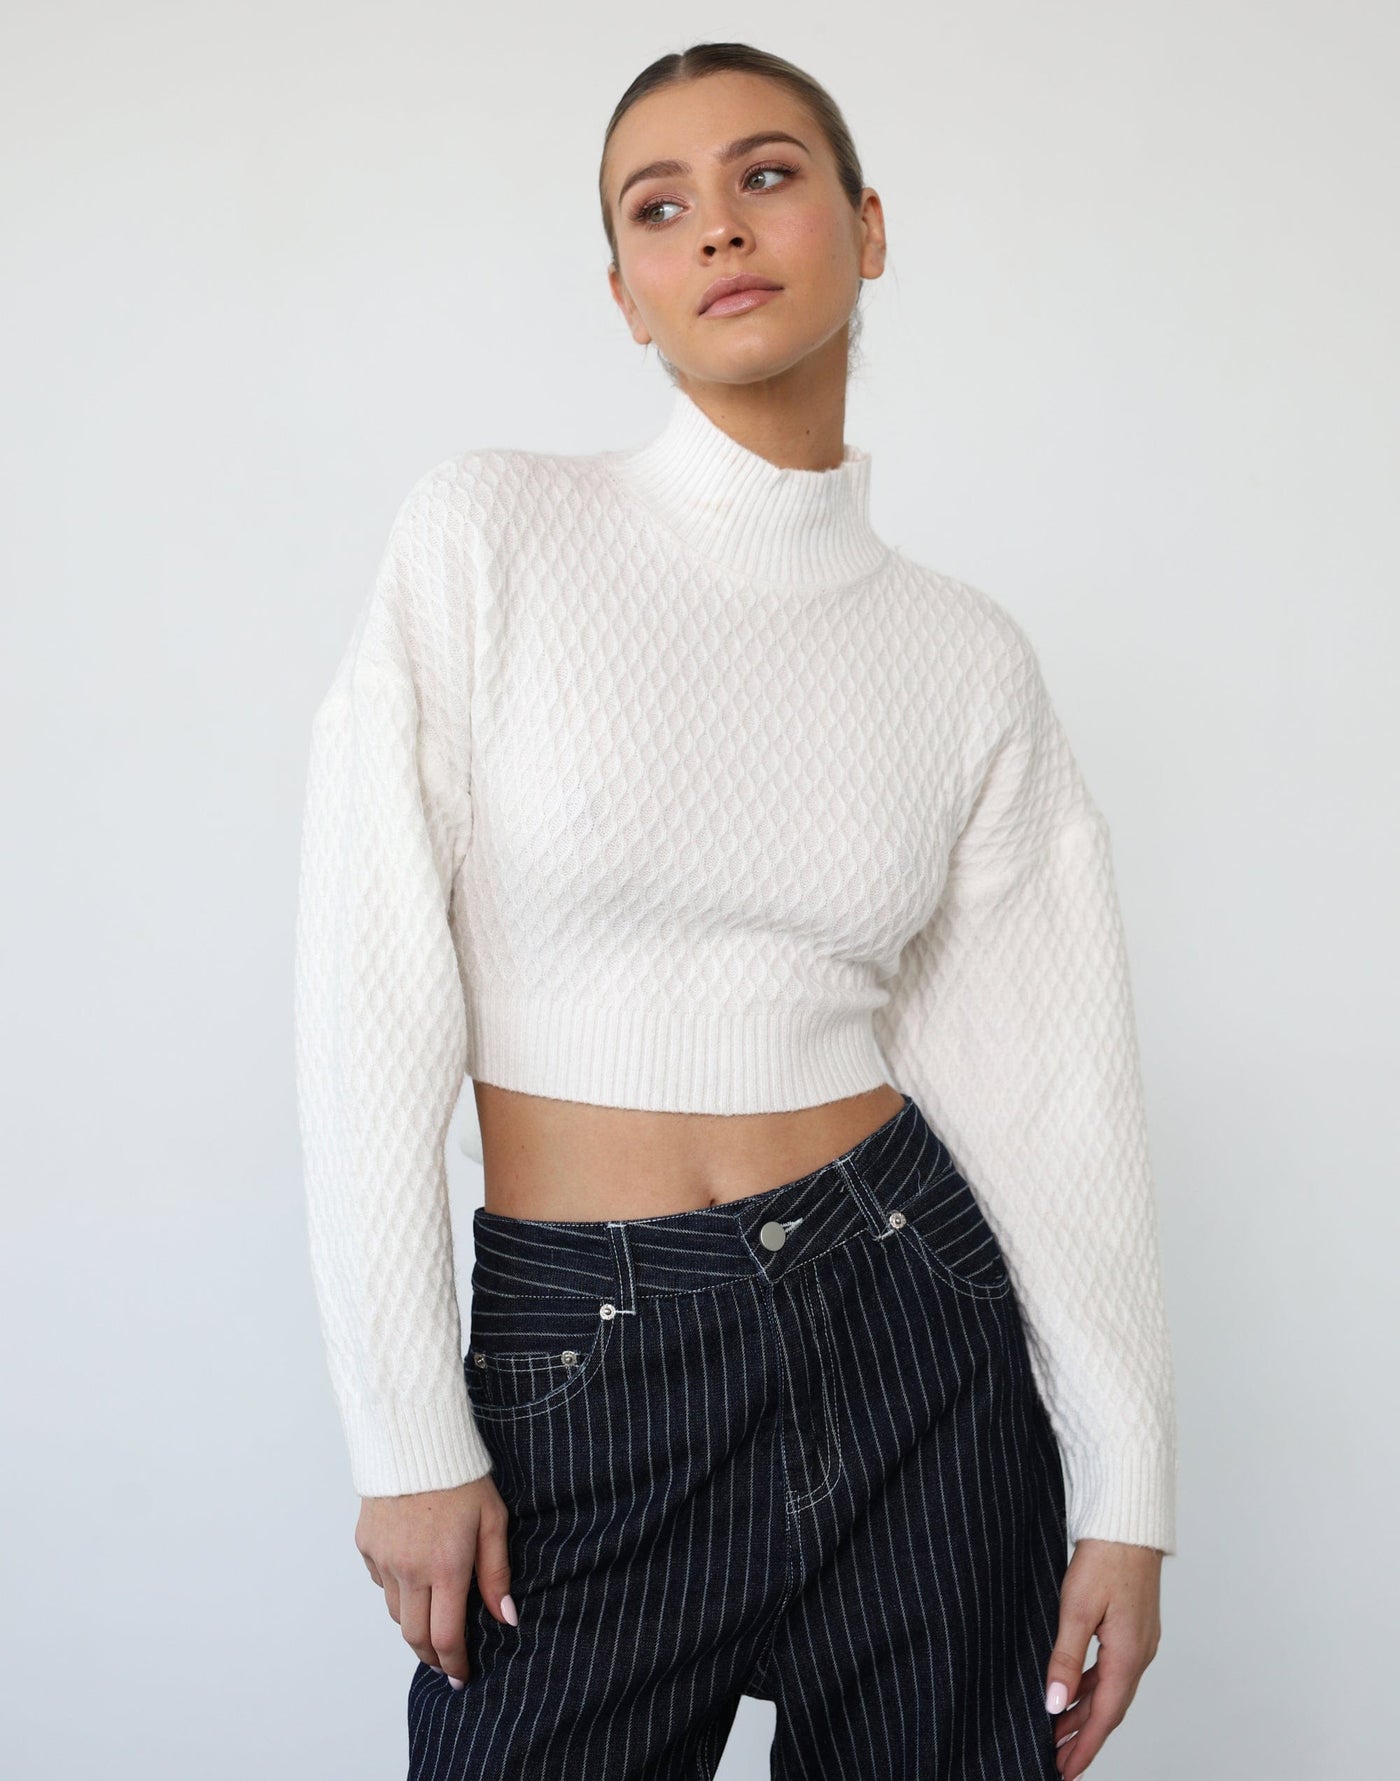 Helena Jumper (White) - Open Back Cropped Jumper - Women's Tops - Charcoal Clothing